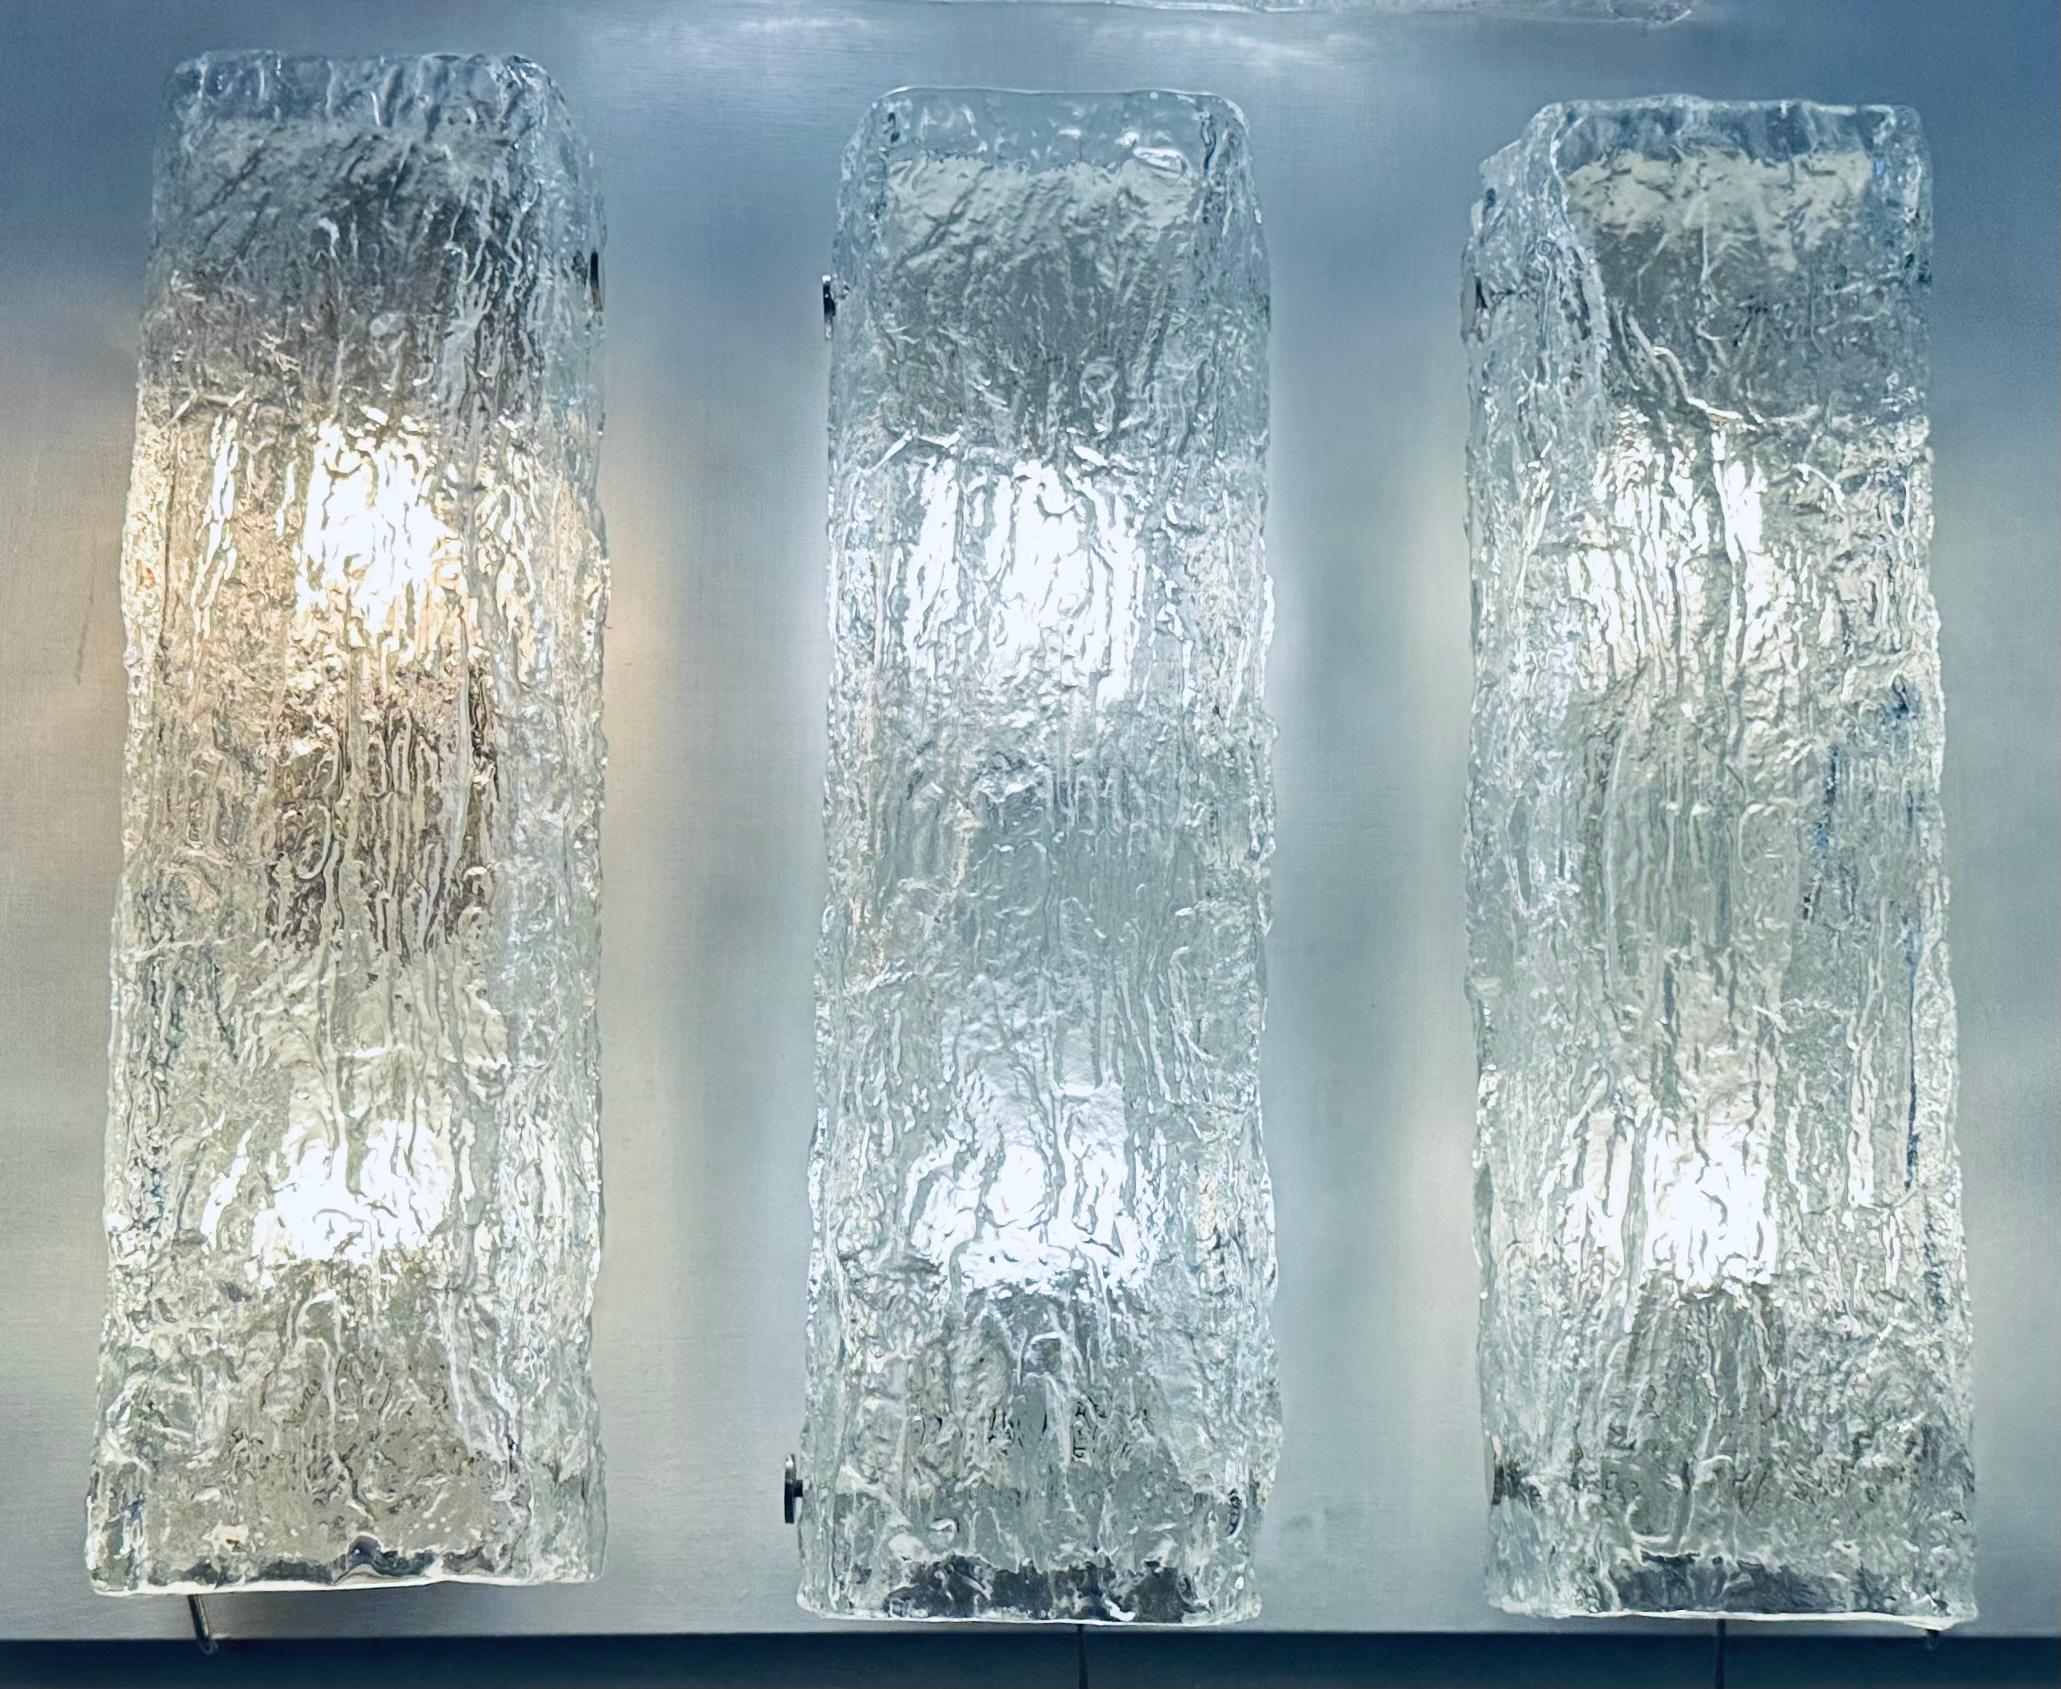 A set of 3 (priced individually) 1970s iced-glass textured wall sconces or wall lights manufactured by the upmarket German light manufacturer Kaiser Leuchten. The rectangular thick textured glass screws onto a white lacquered metal frame which is